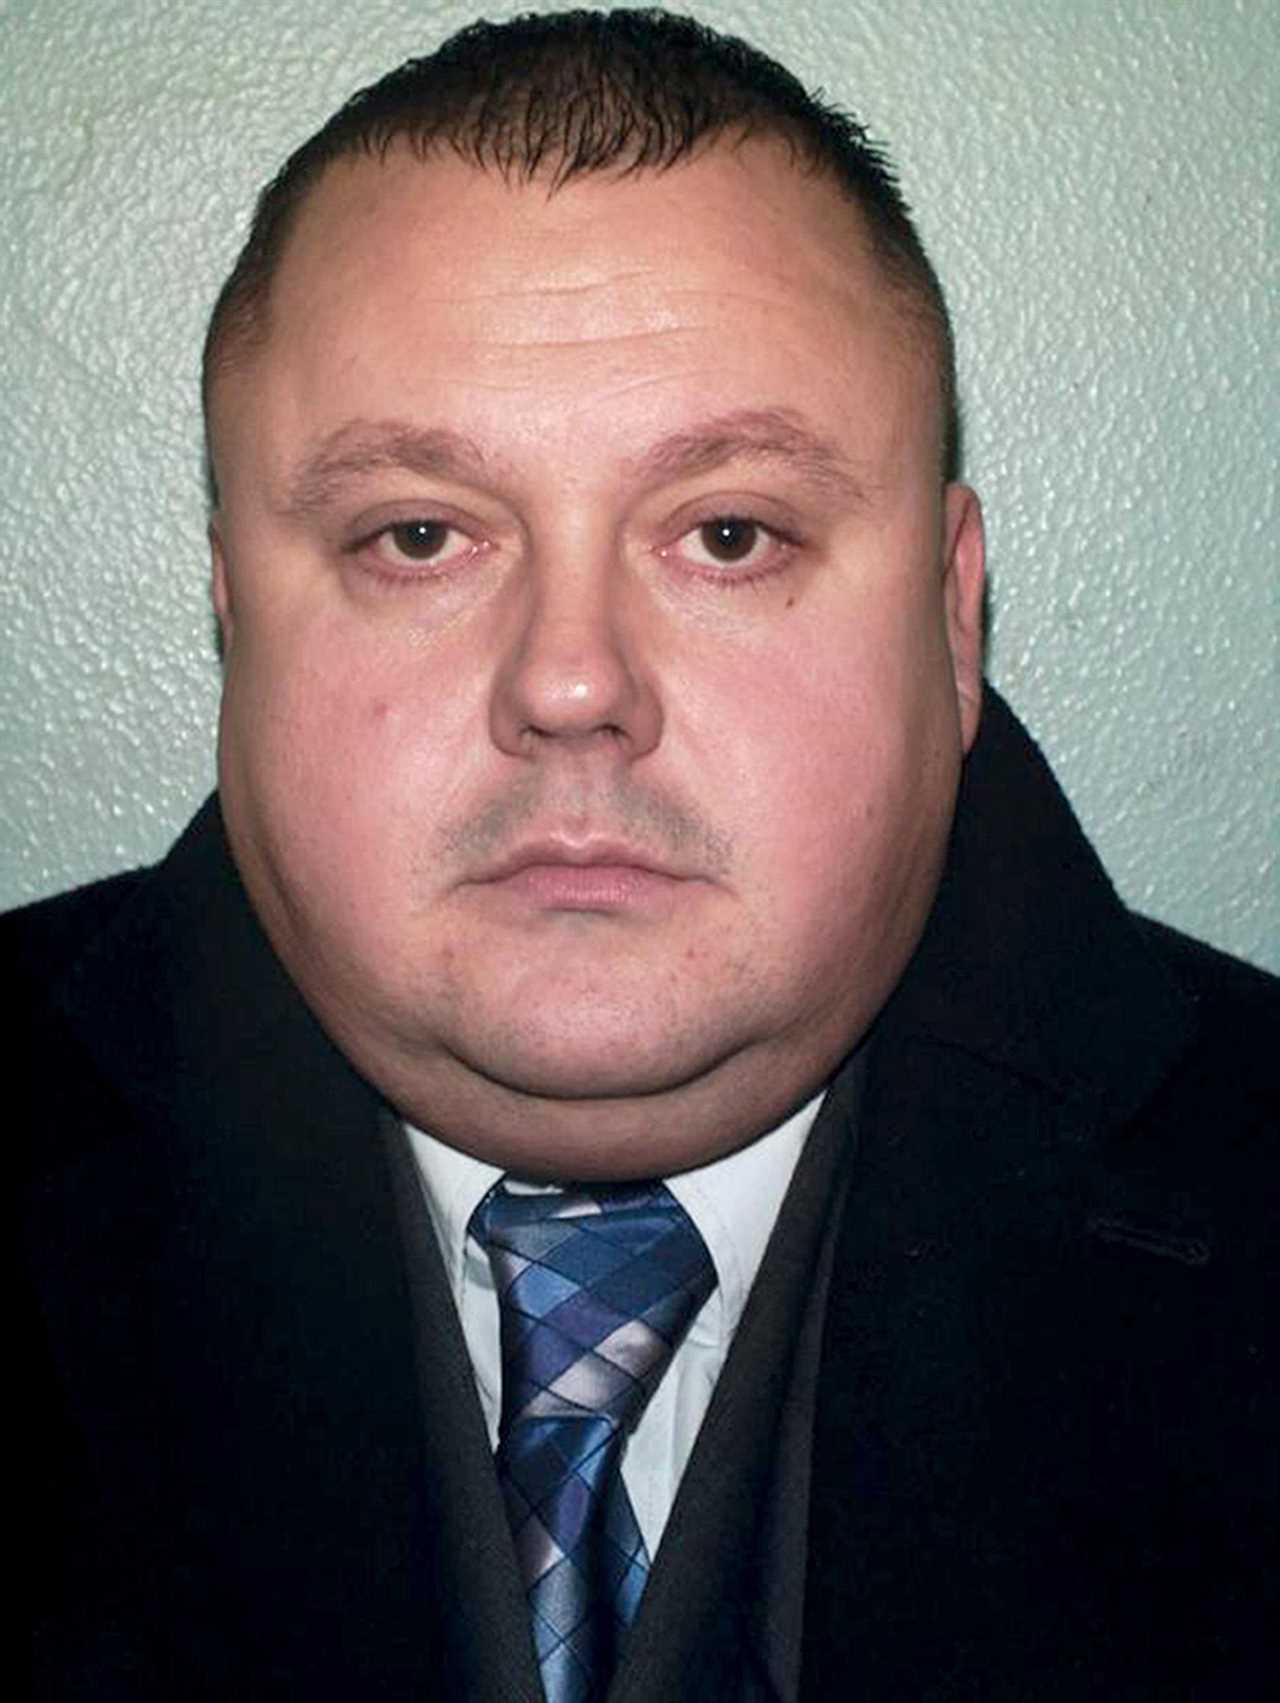 Serial killer Levi Bellfield’s prison wedding to blonde girlfriend in doubt as minister threatens to BLOCK marriage